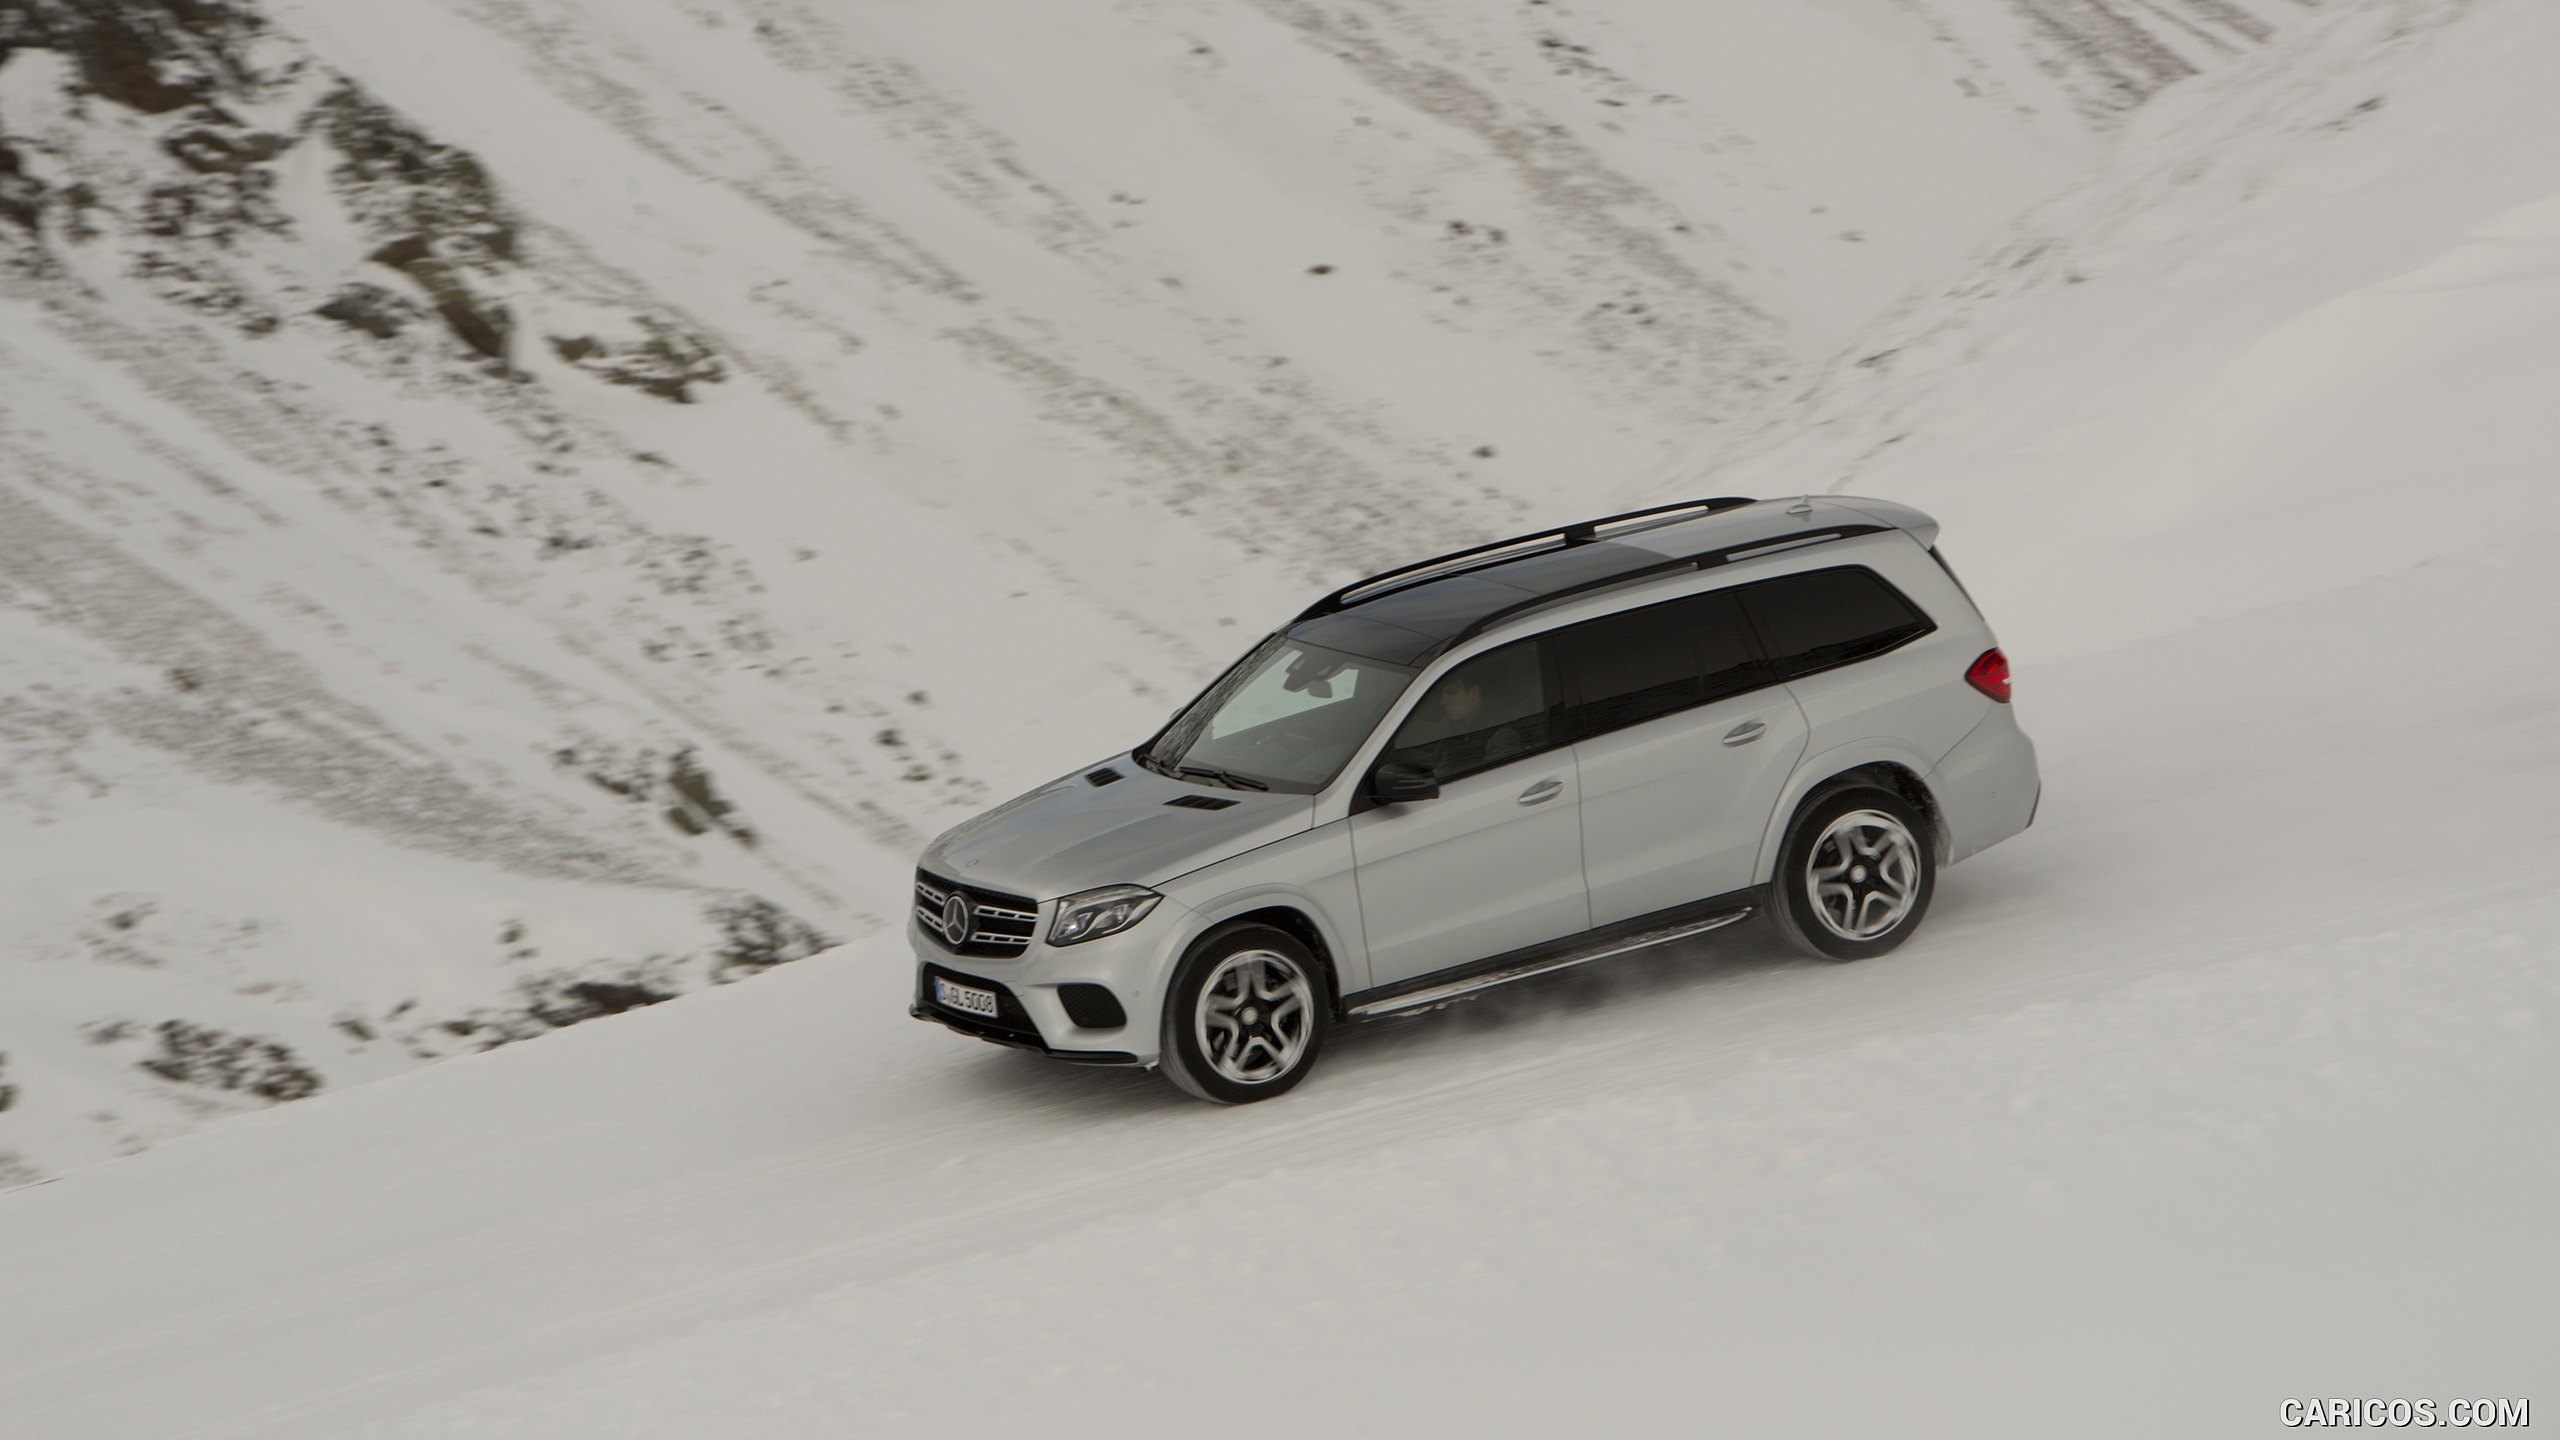 2017 Mercedes-Benz GLS 500 4MATIC AMG Line in Snow - Side, #156 of 255